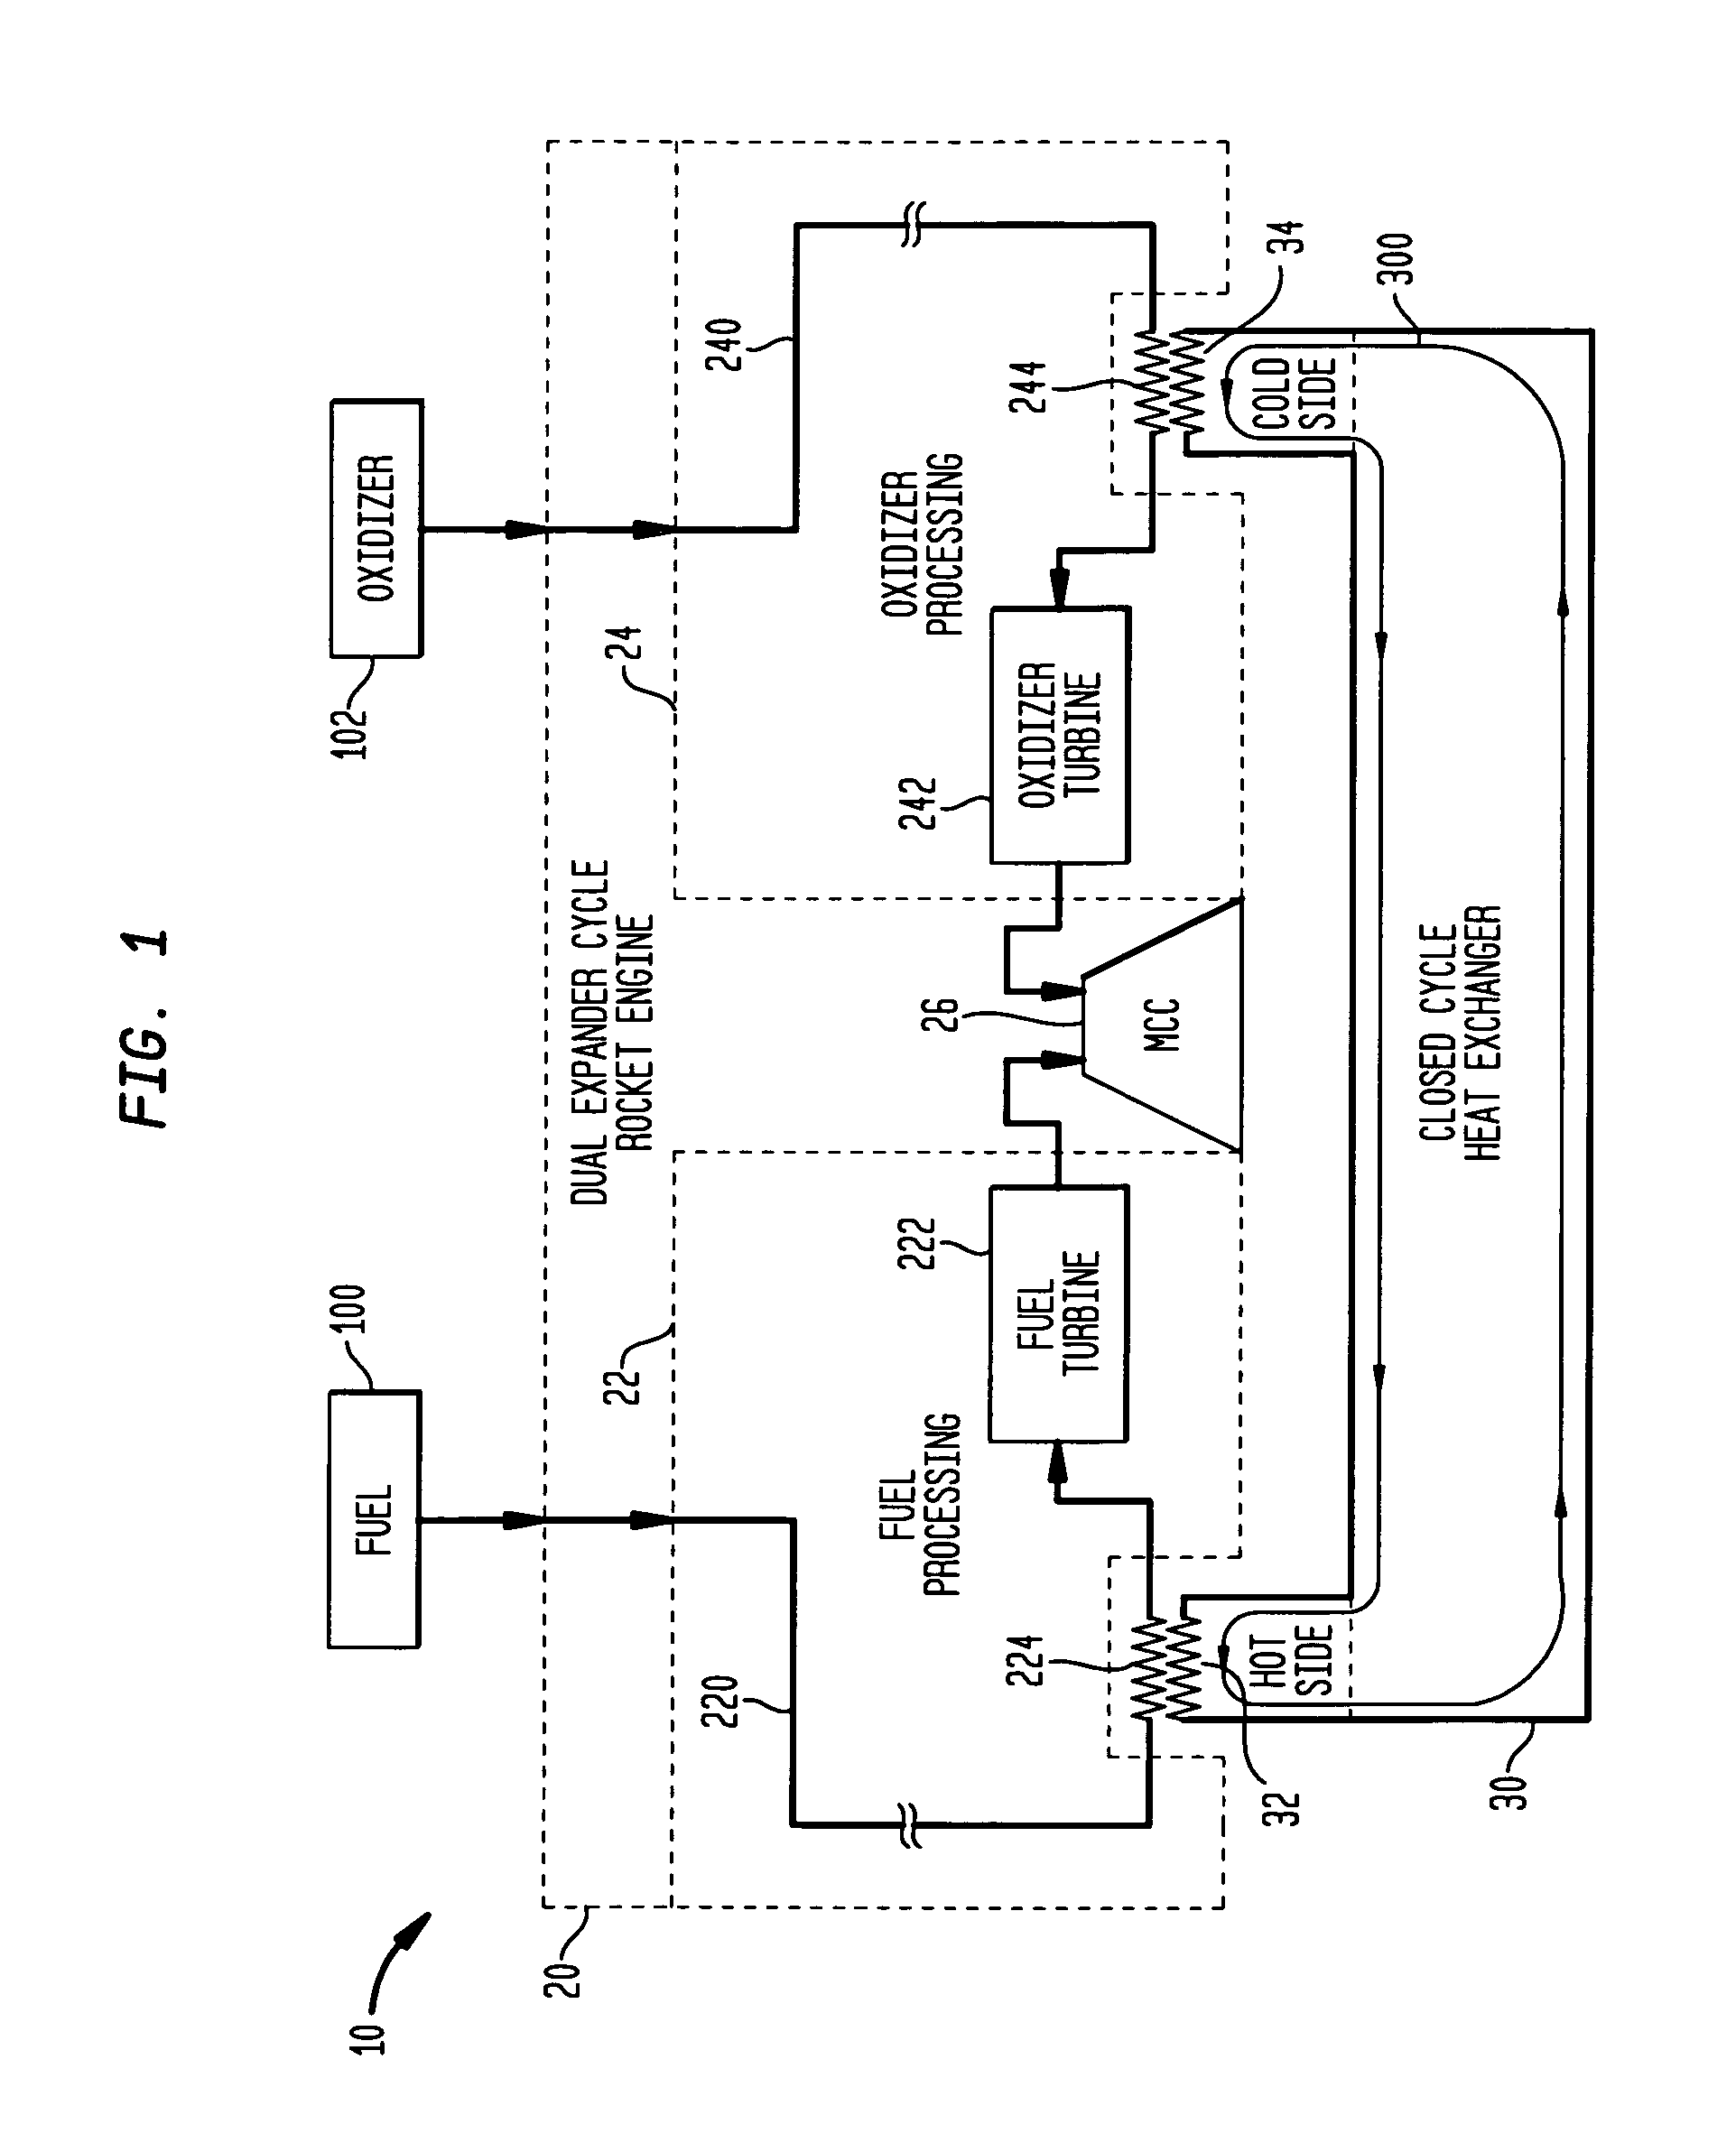 Dual expander cycle rocket engine with an intermediate, closed-cycle heat exchanger